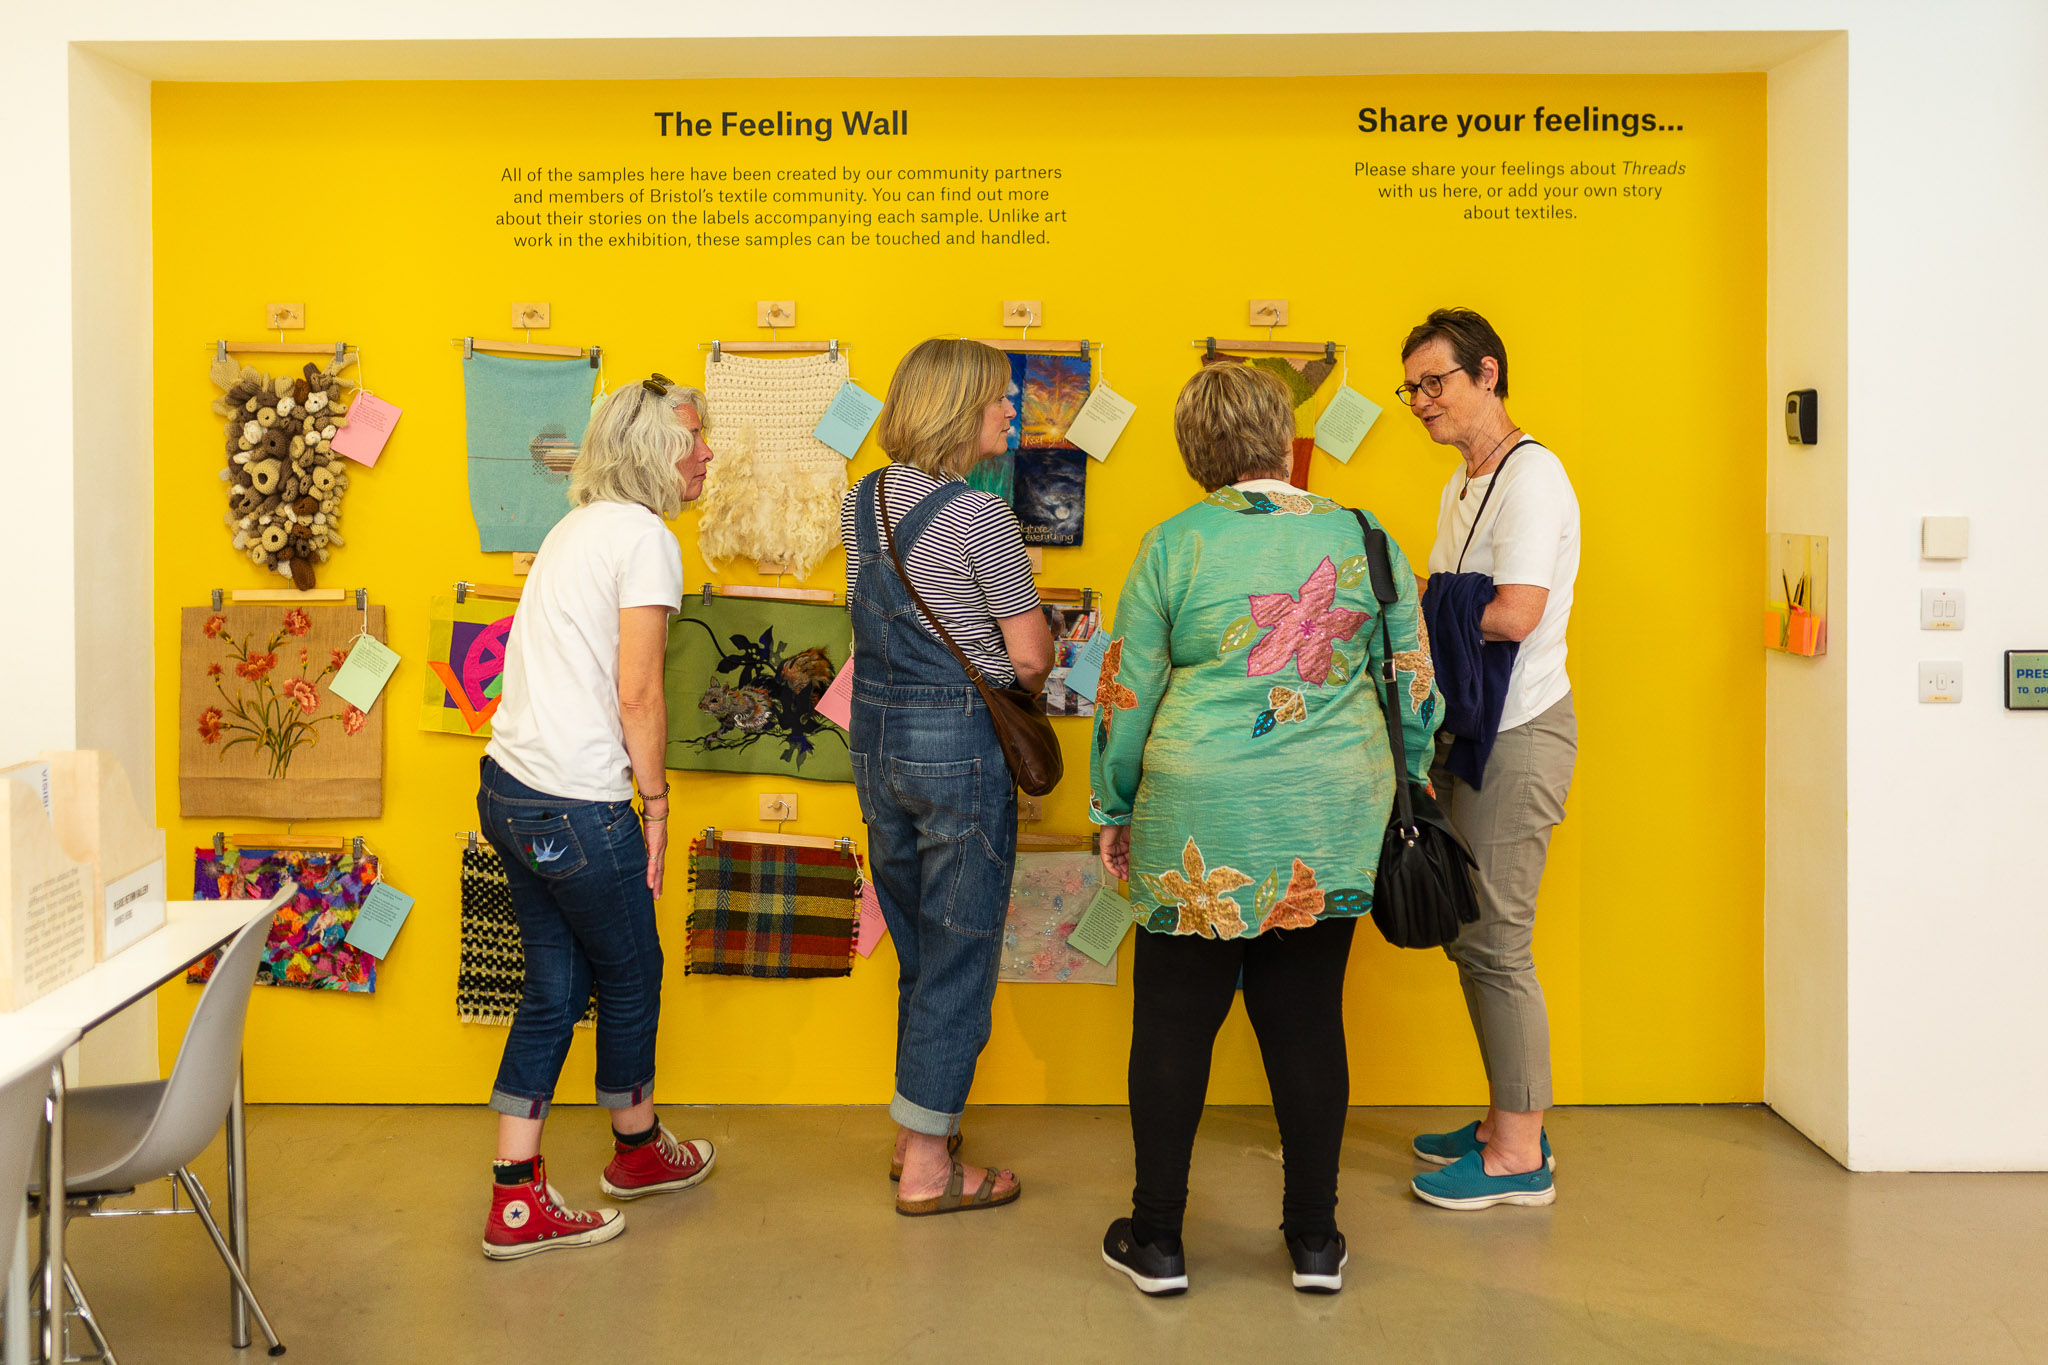 Four people are standing in a line talking to one another. They are facing a bright yellow wall on which are a collection of textiles.